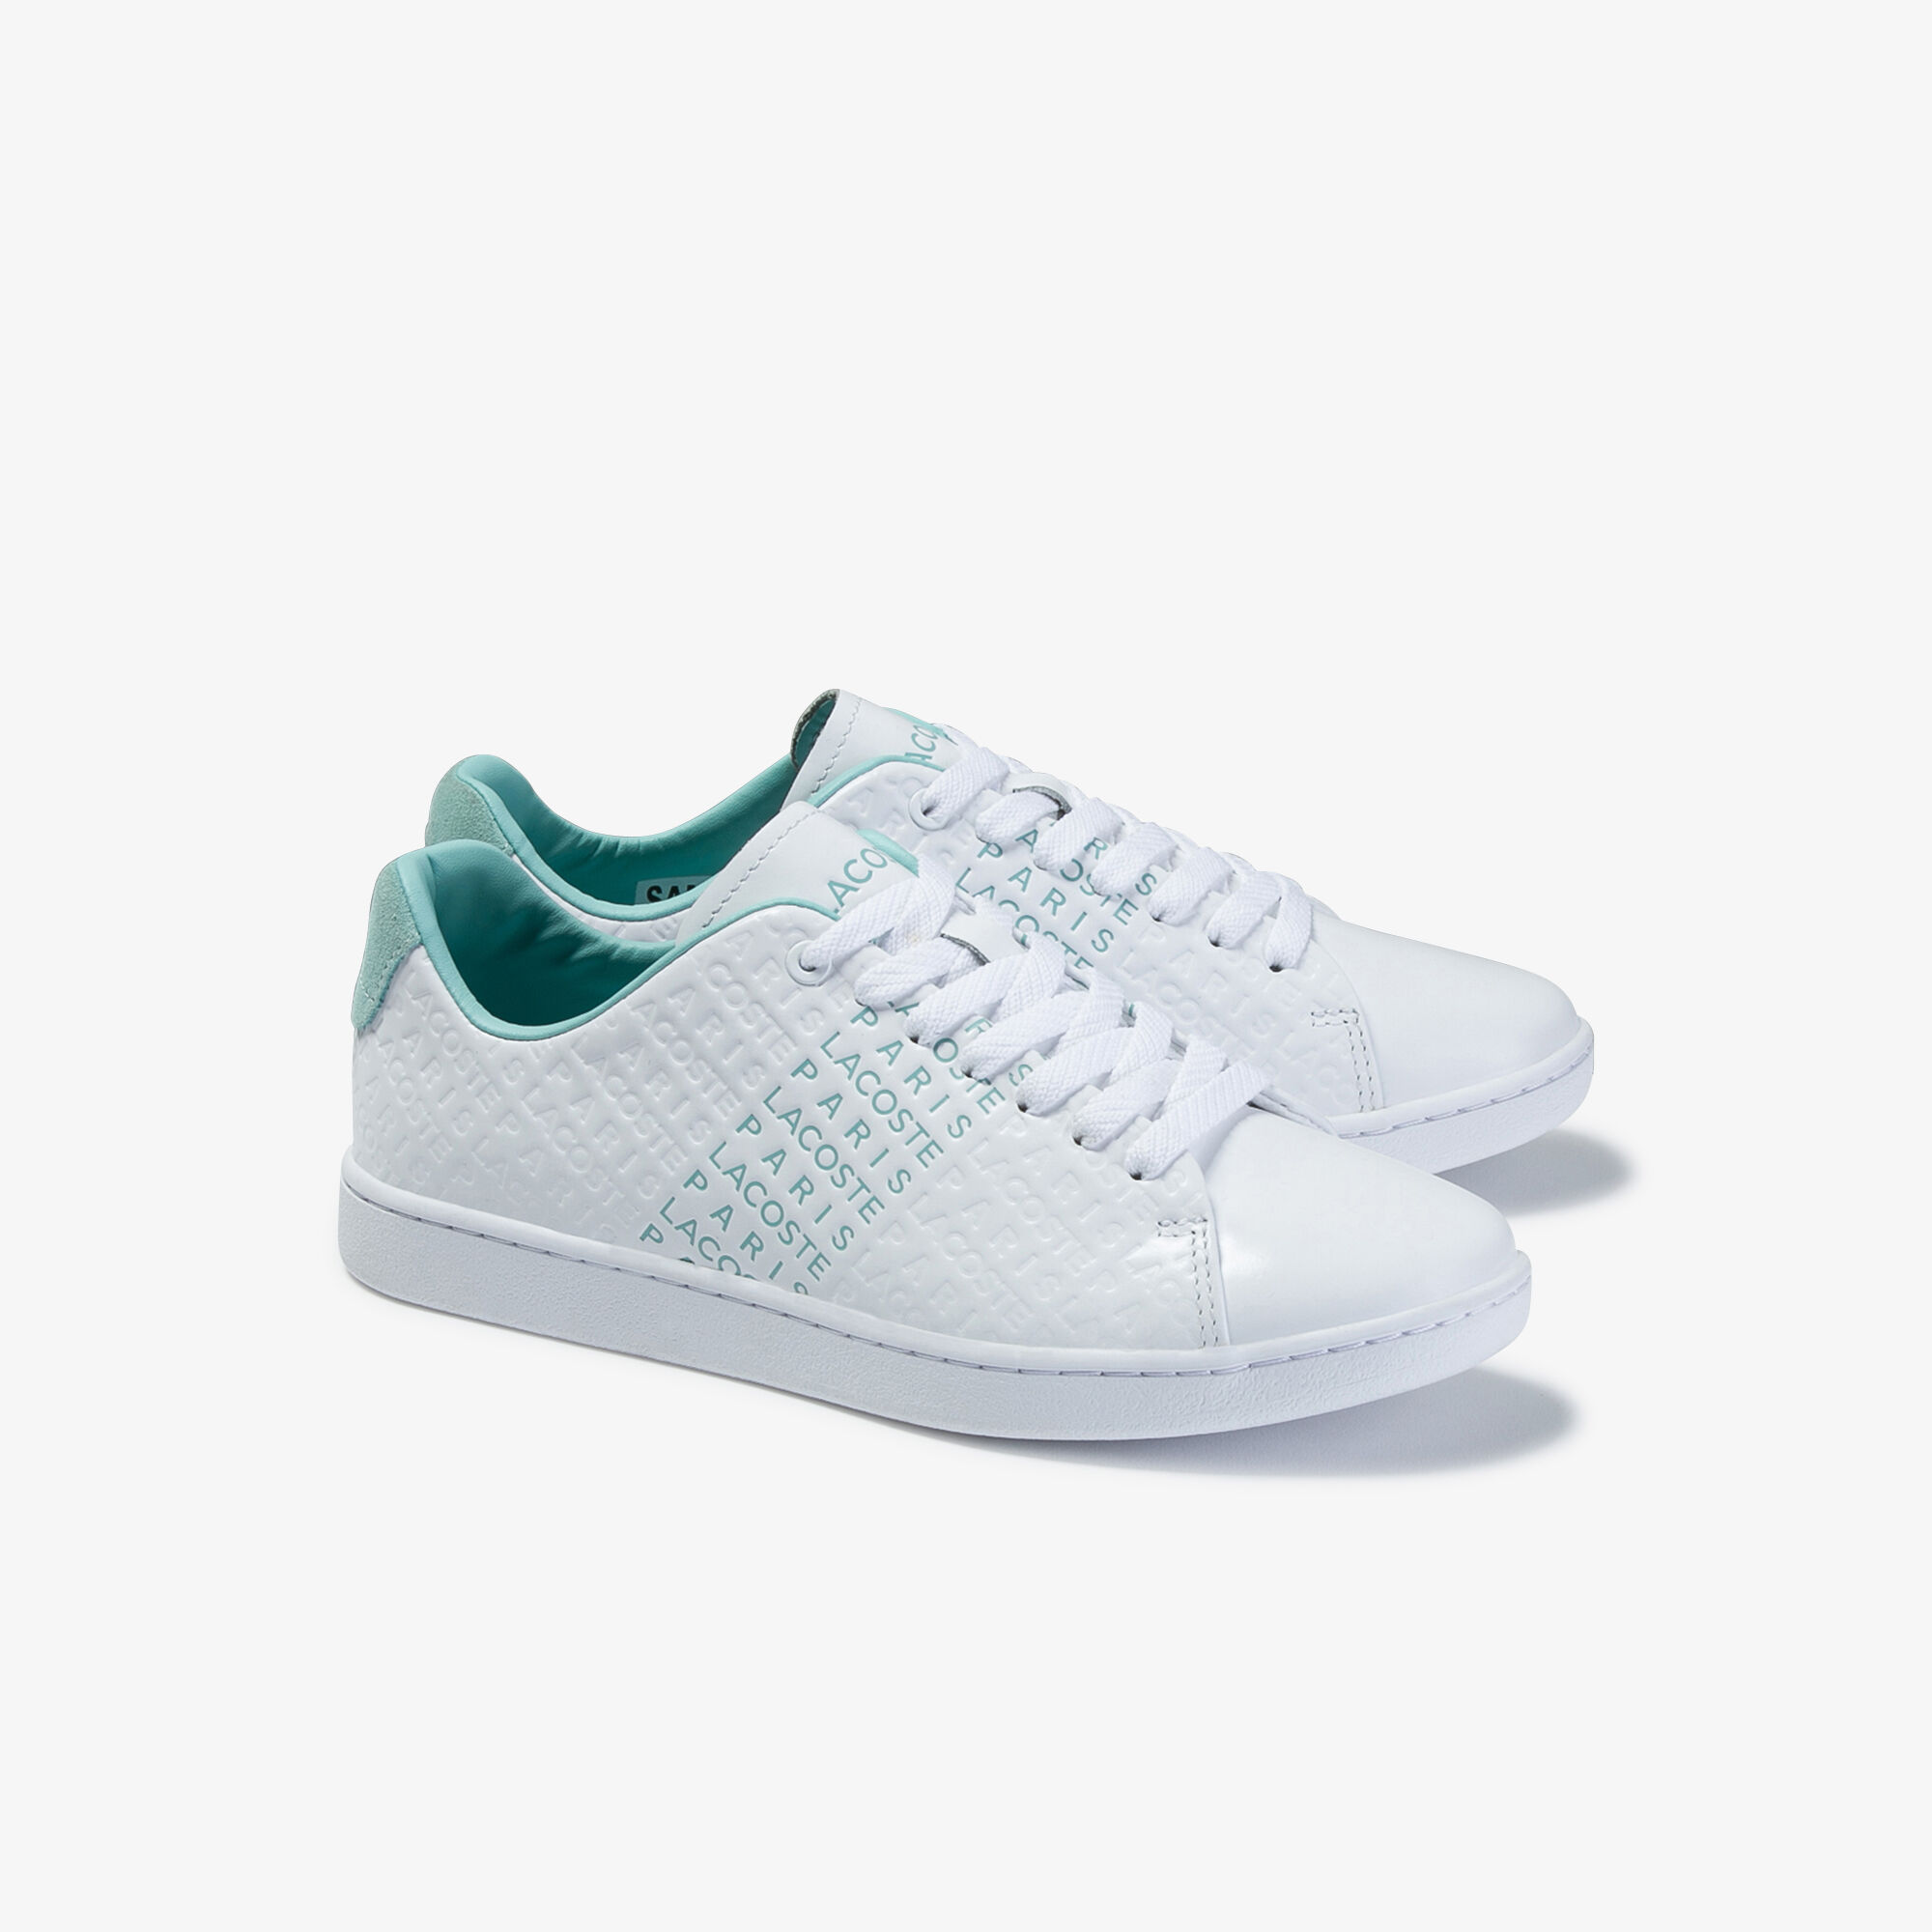 Women's Carnaby Evo Leather and Suede Sneakers